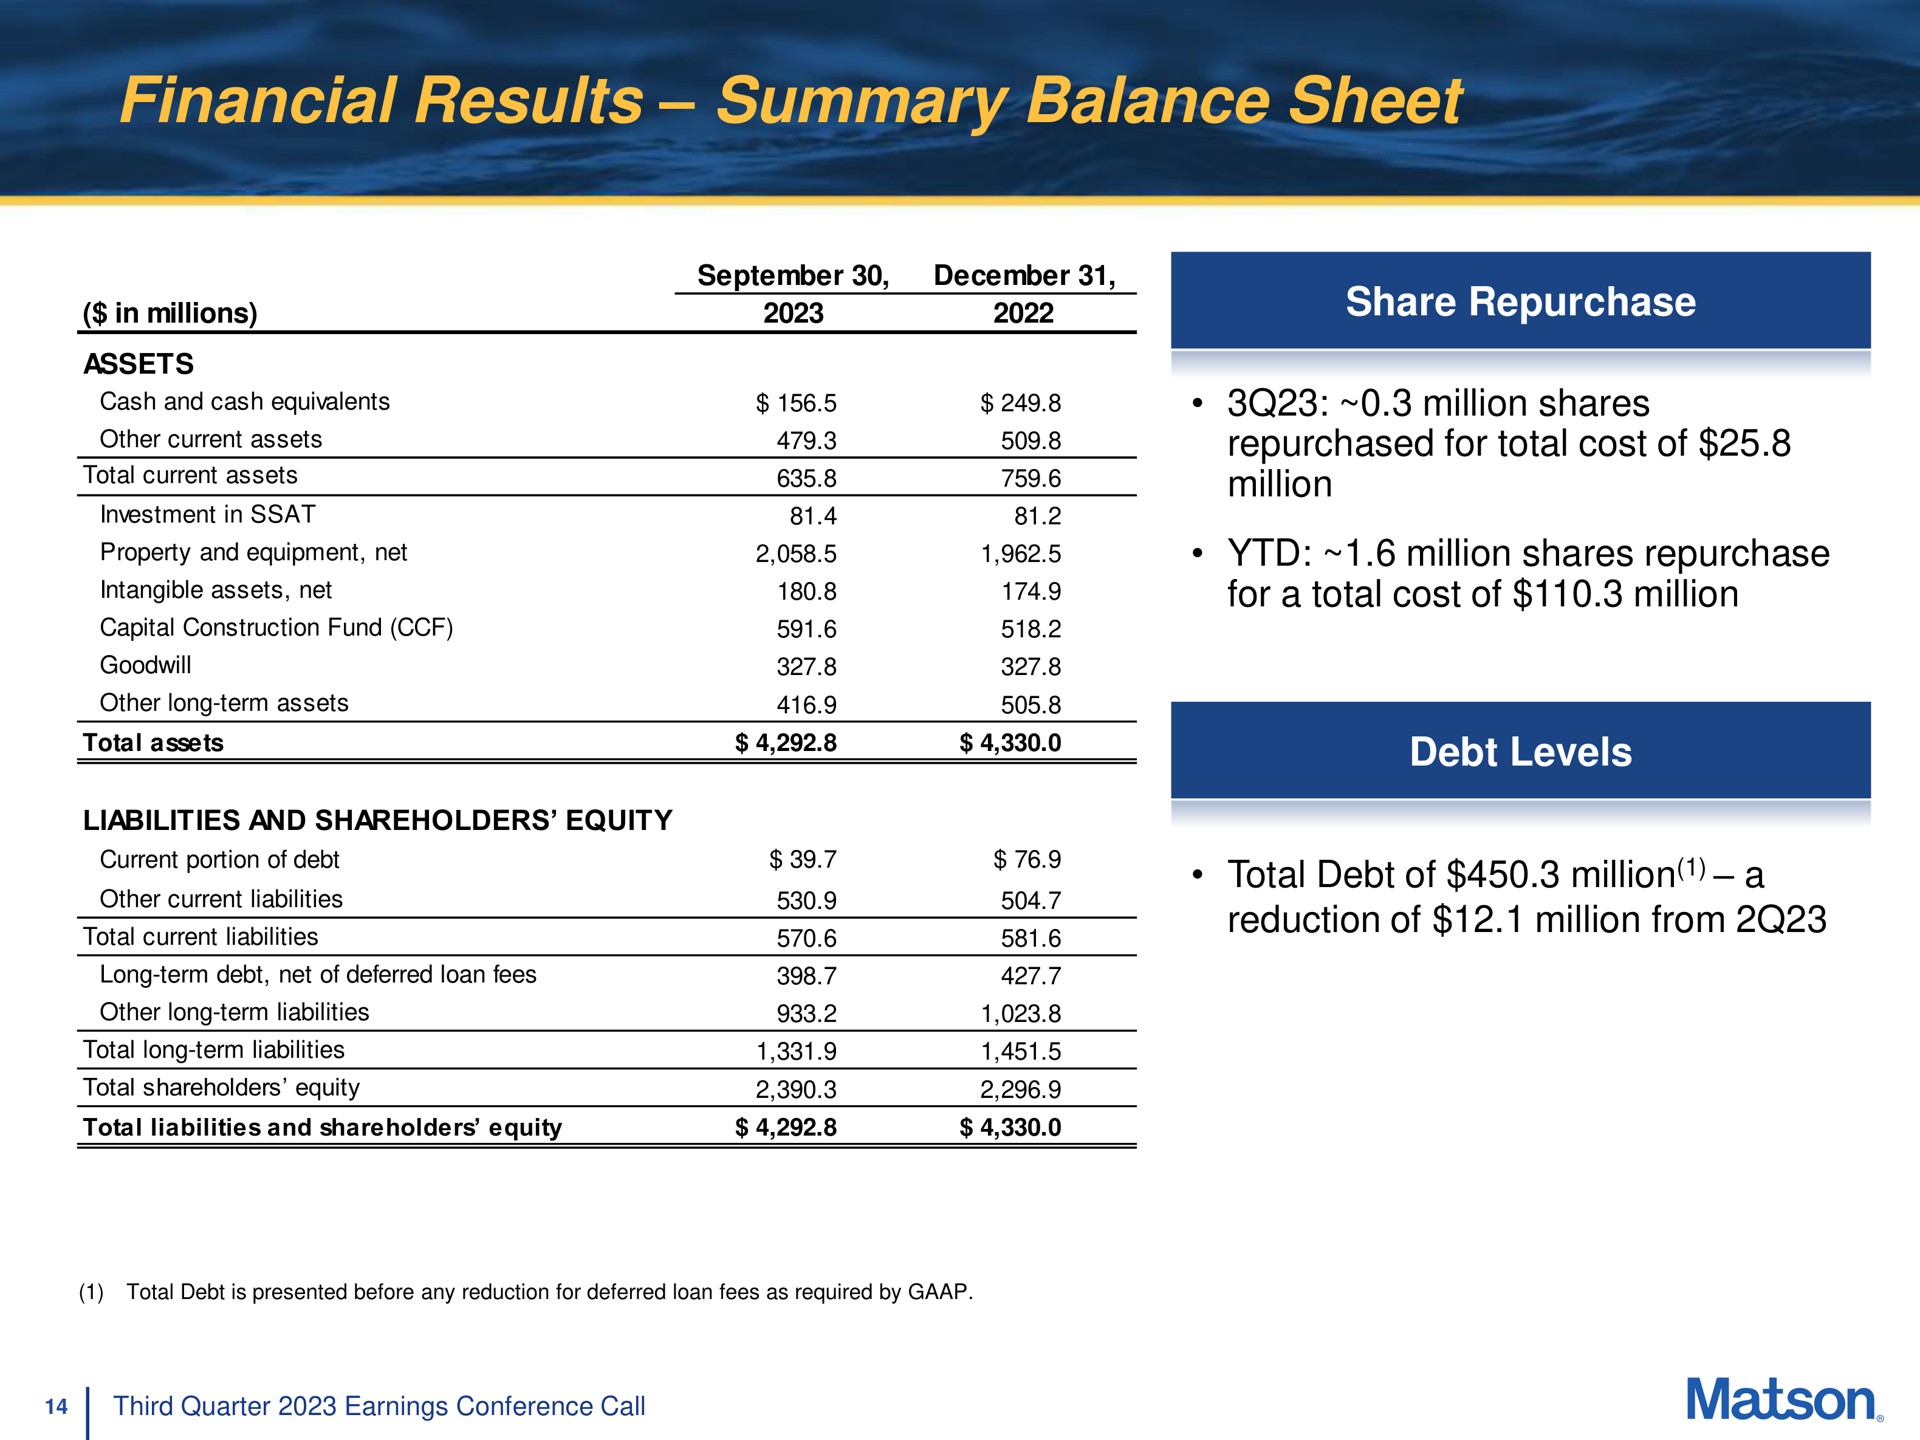 financial results summary balance sheet current portion of debt total debt of million a vise | Matson